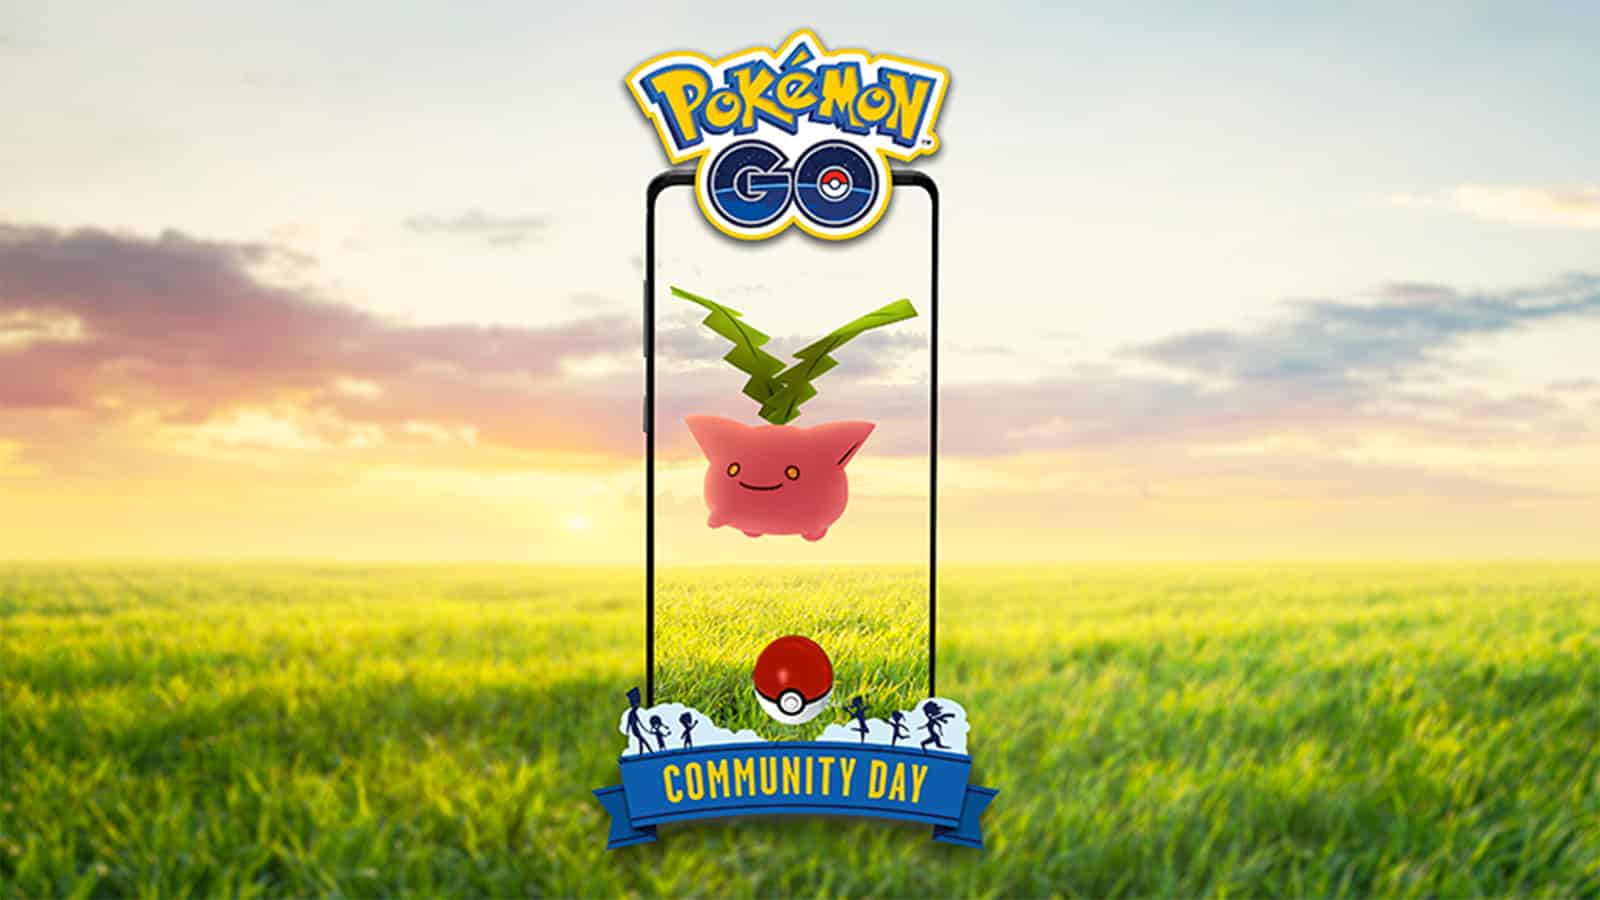 Hoppip appearing in the Pokemon Go Community Day Special Research